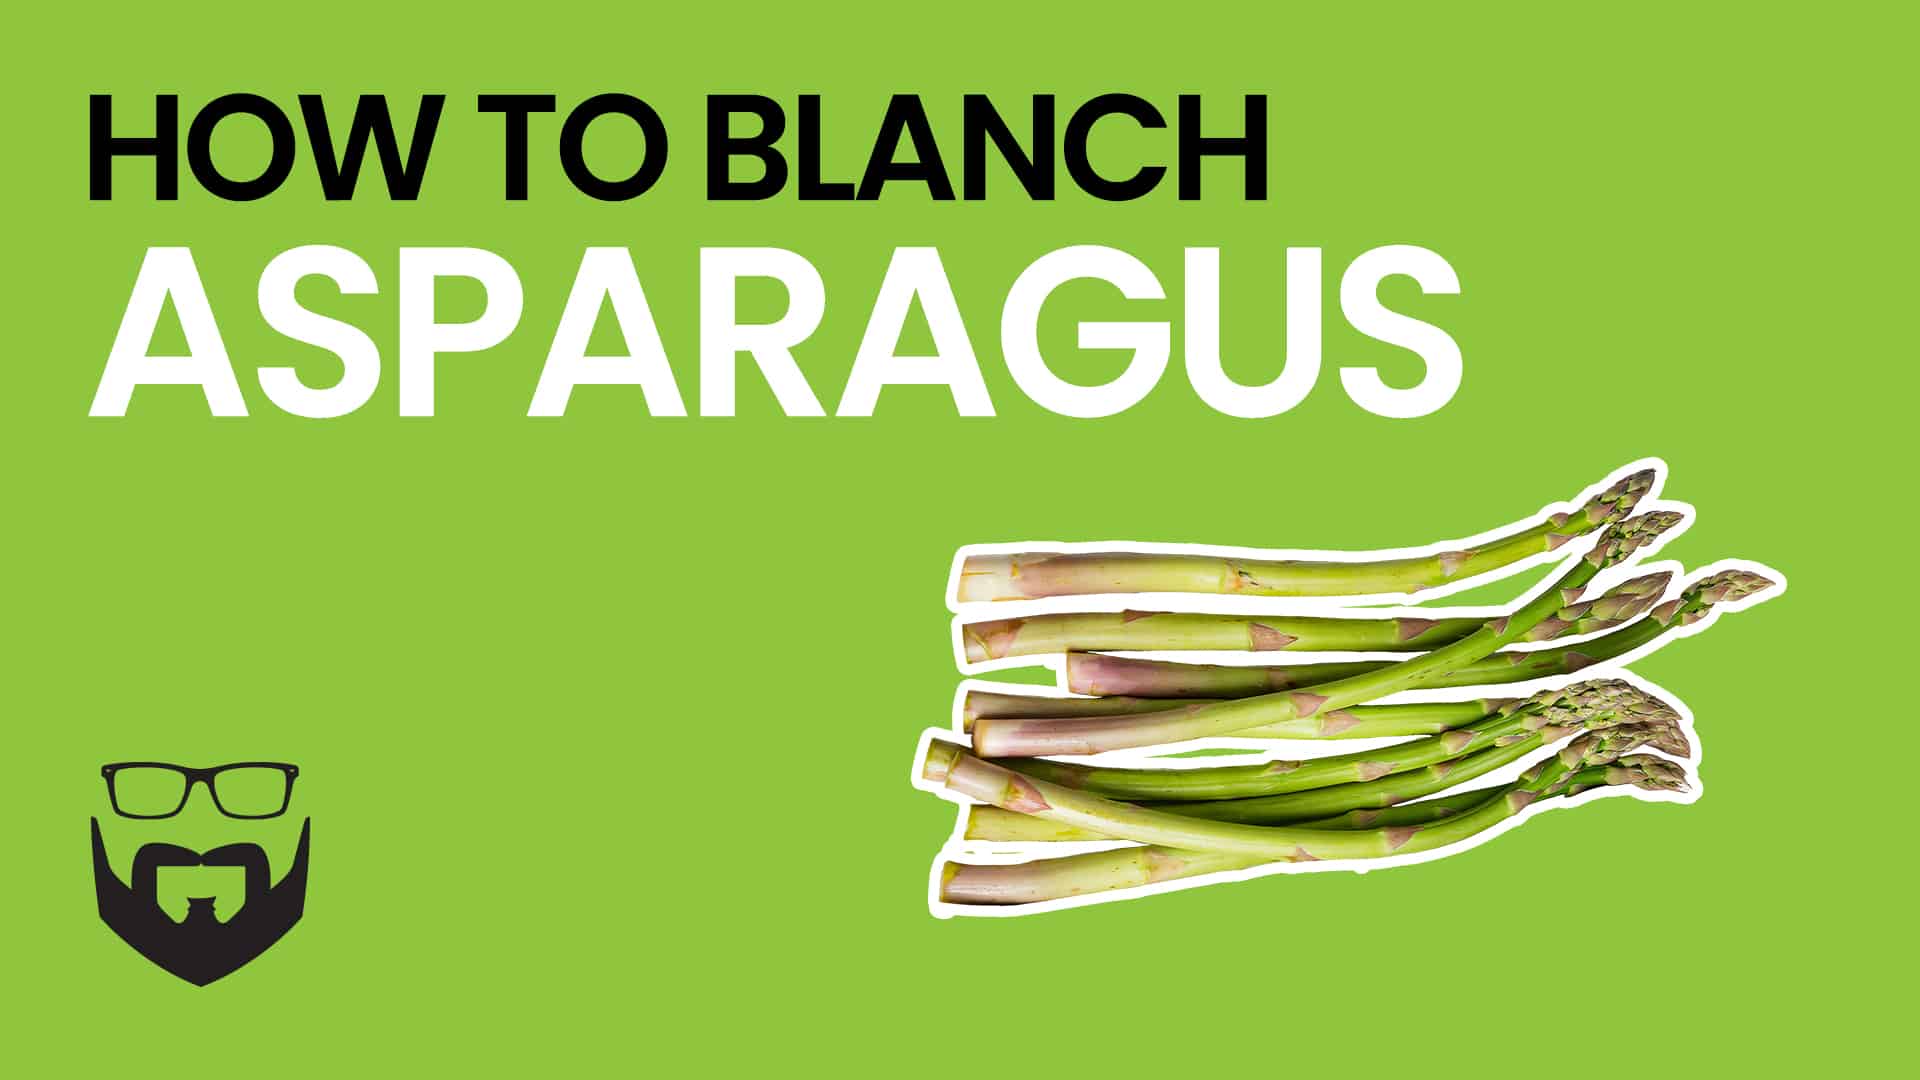 How to Blanch Asparagus Video - Green